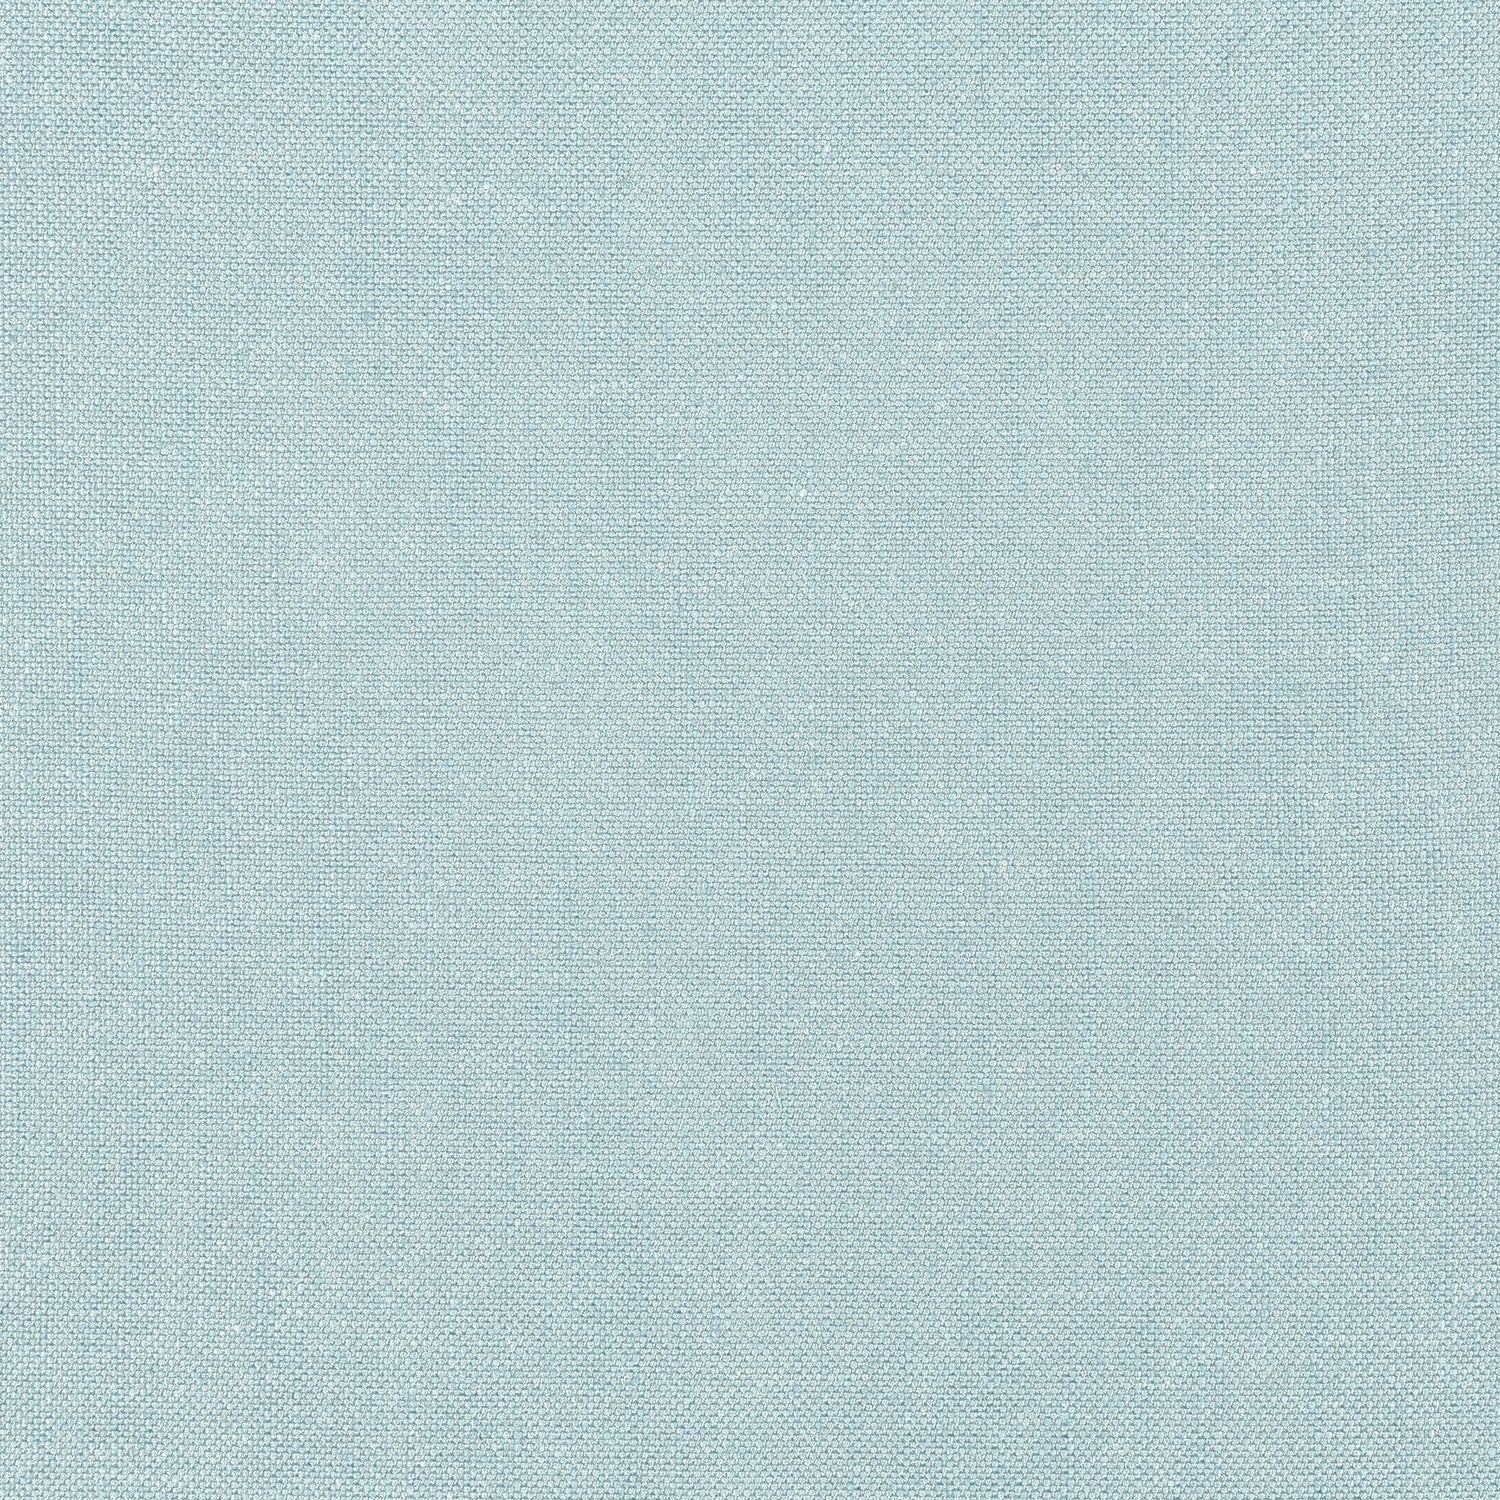 Palisade Linen fabric in sky color - pattern number FWW7646 - by Thibaut in the Palisades collection